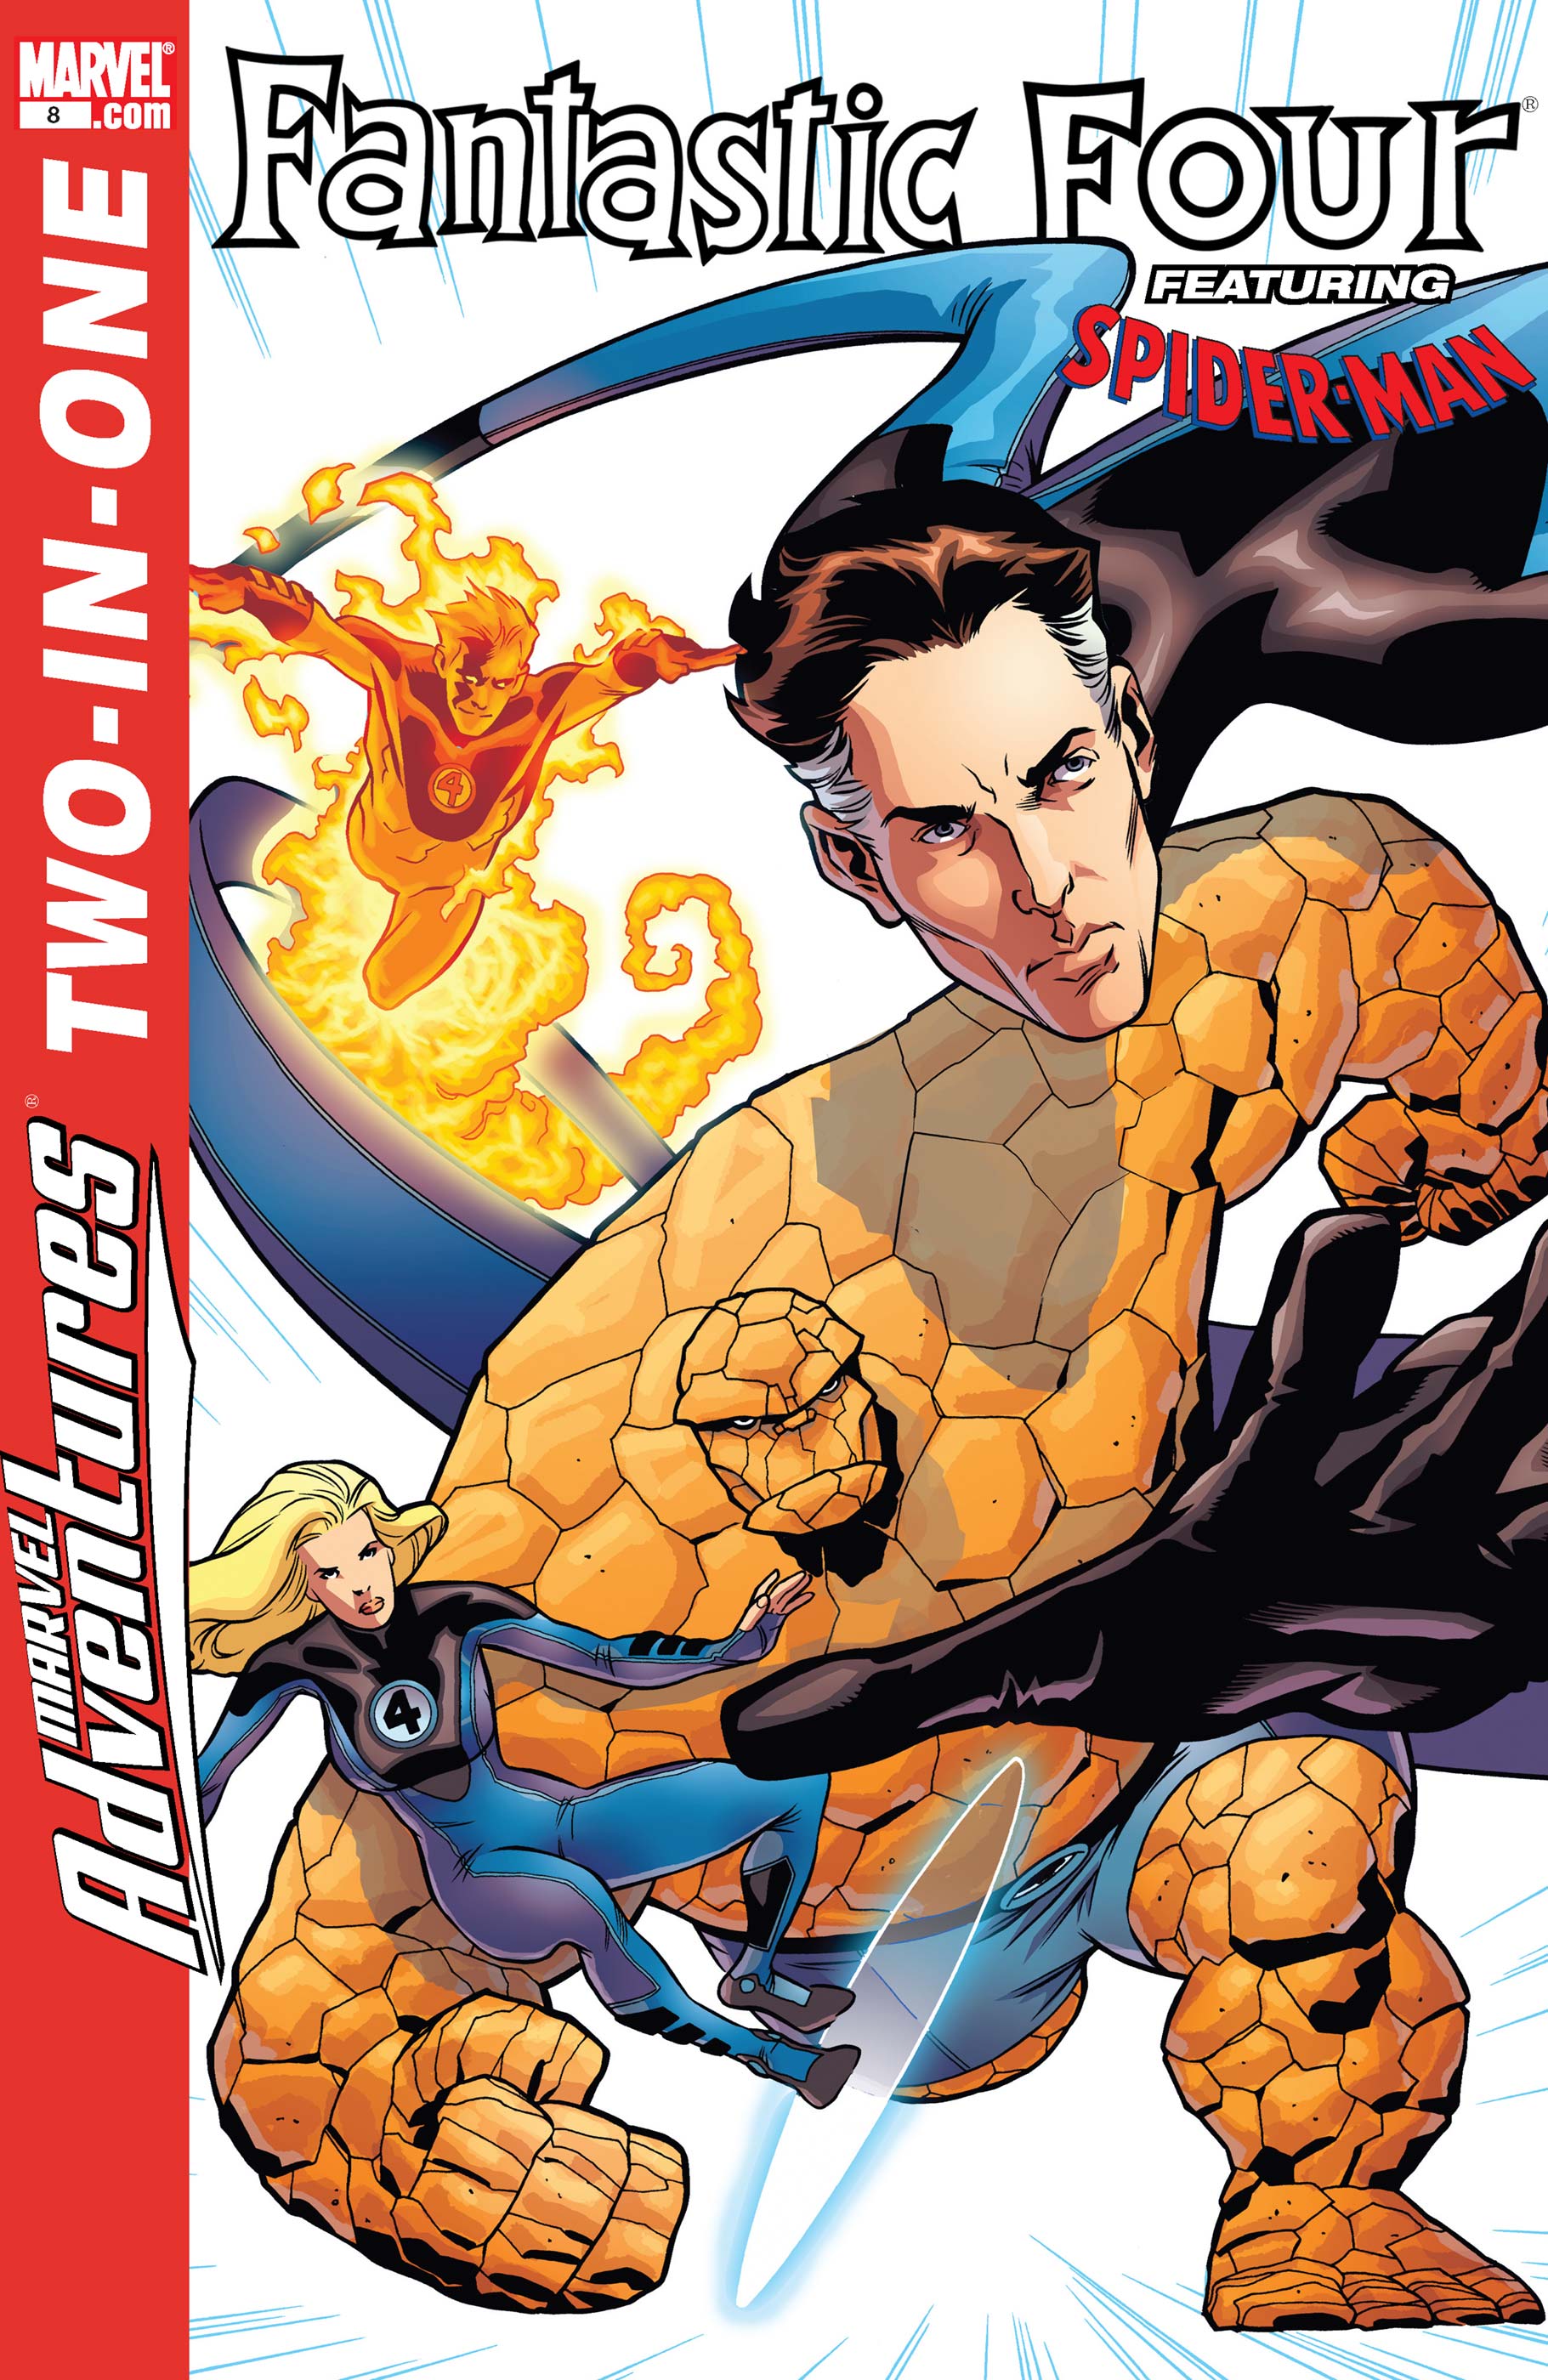 Marvel Adventures Two-in-One (2007) #8